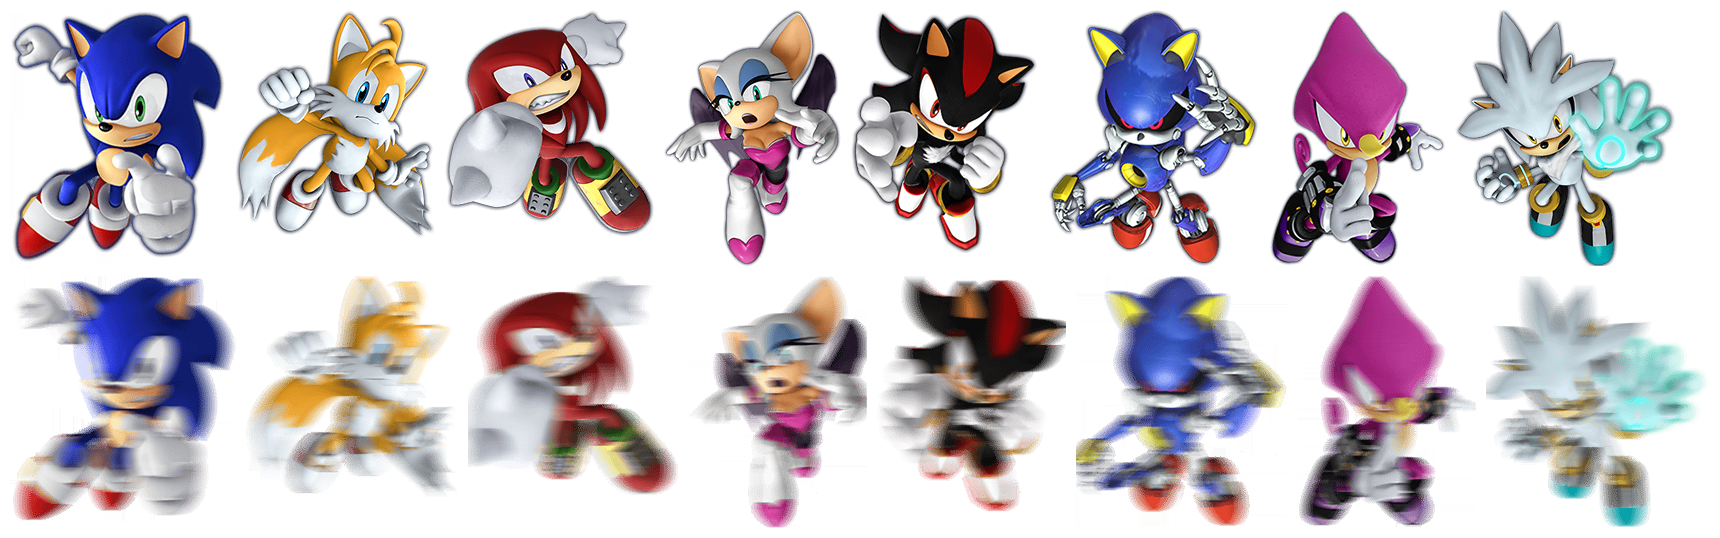 Sonic Rivals 2 - Large Renders